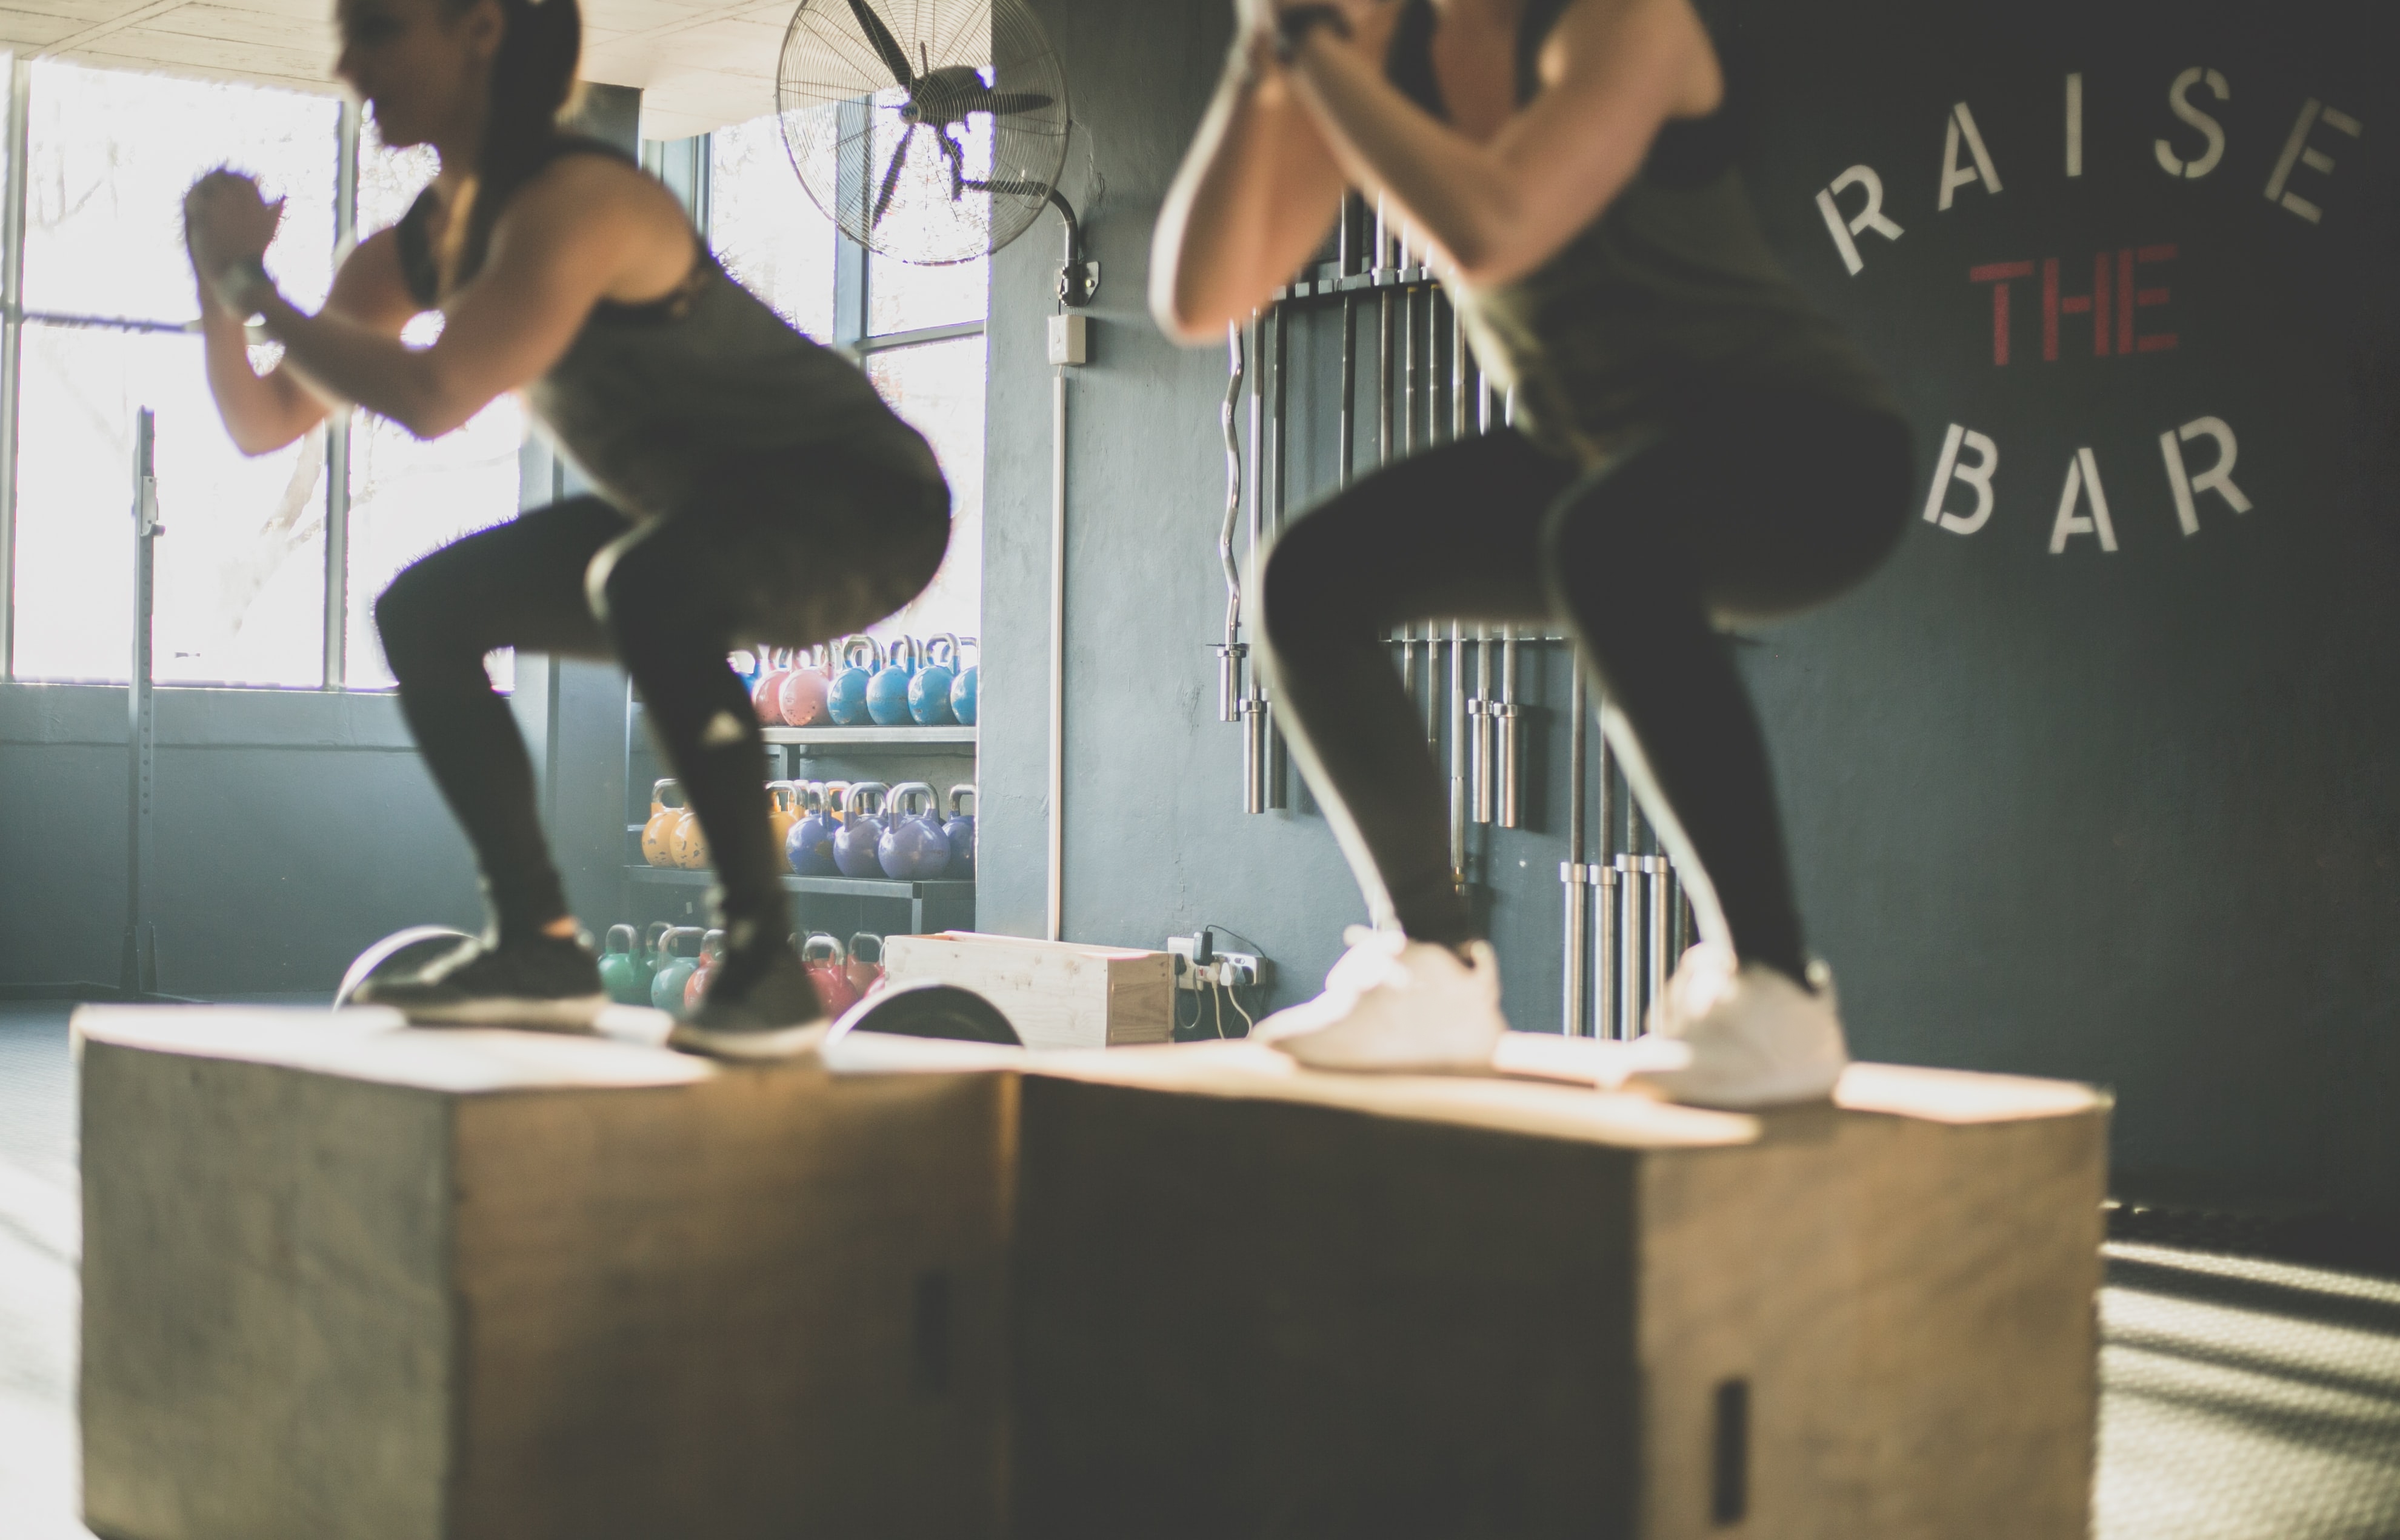 Two women in dark sportswear squatting ontop of boxes in a gym. Raise the bar is written behind them on the wall.